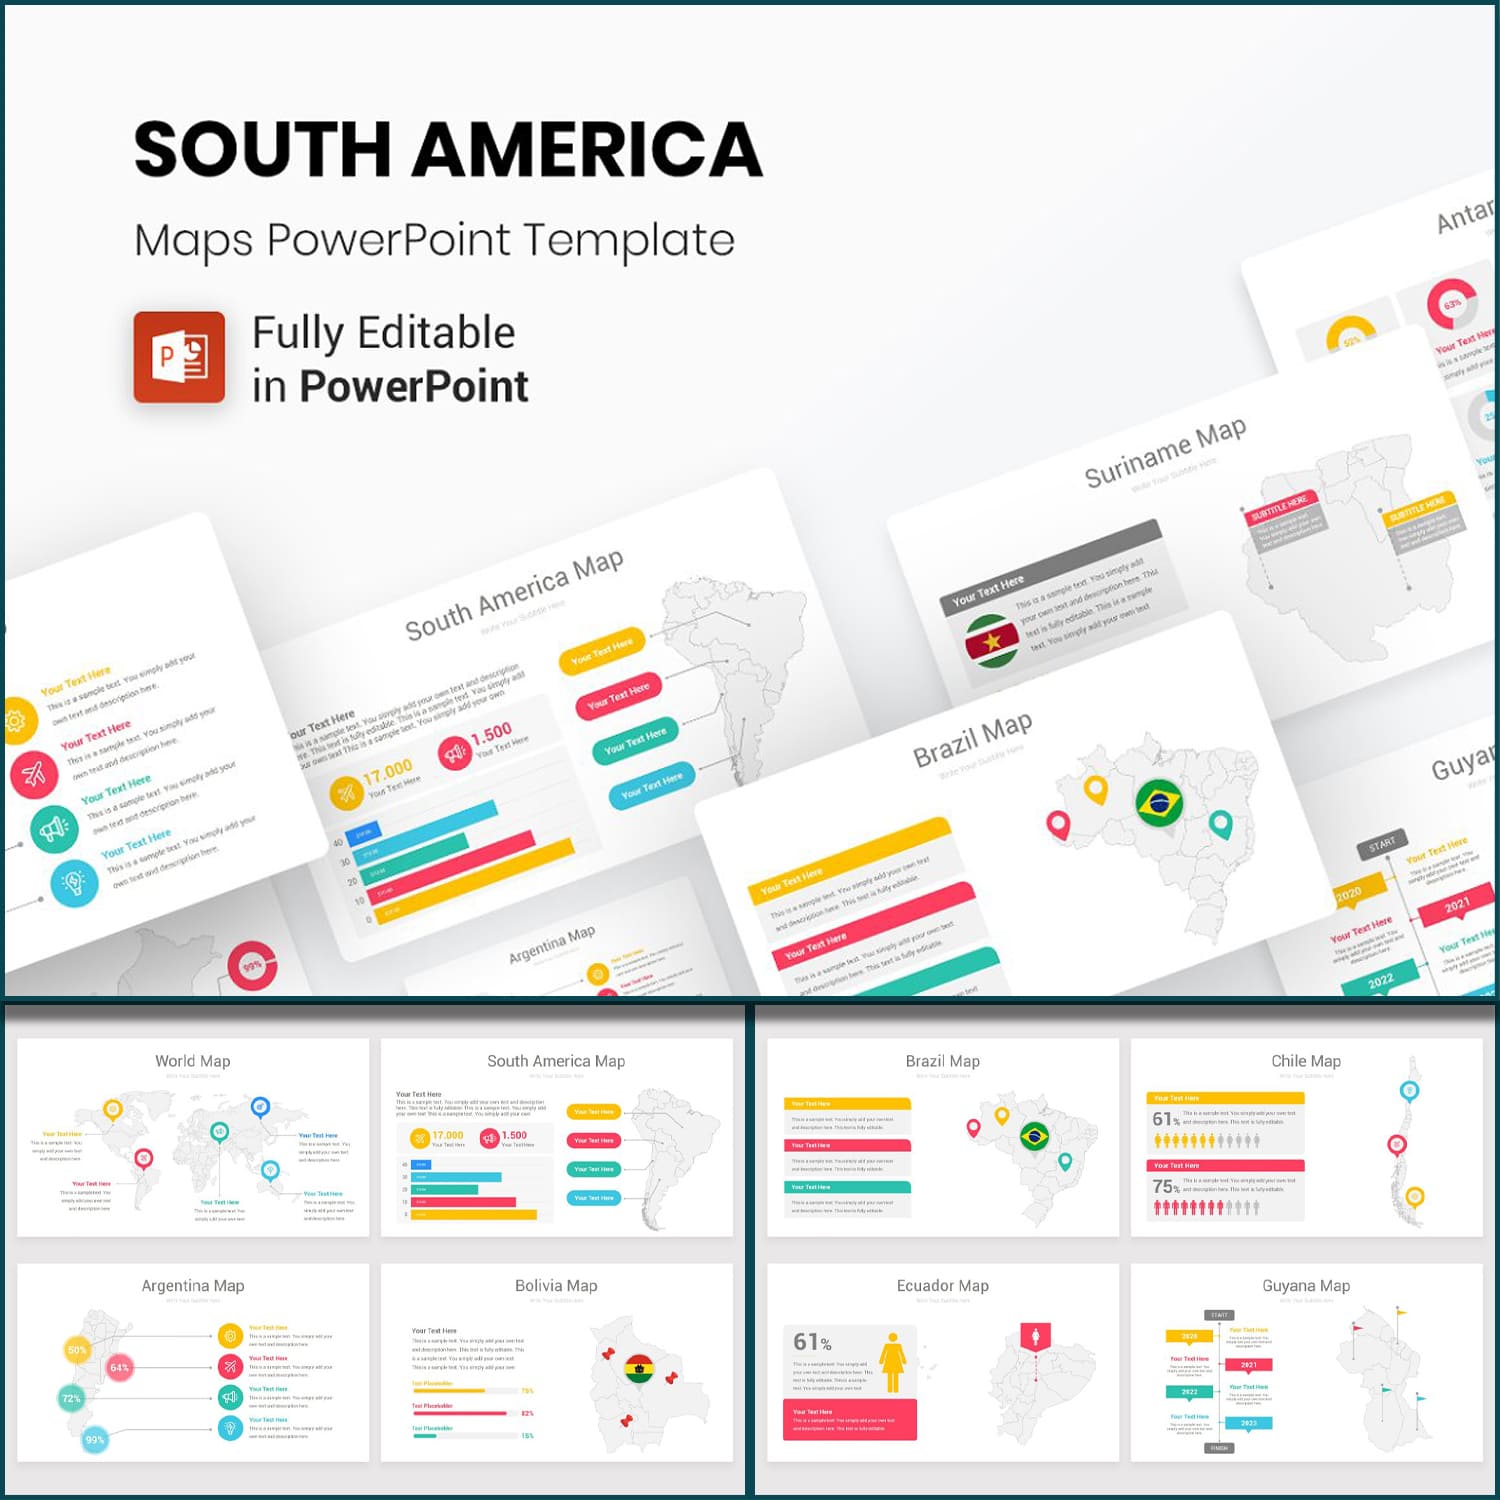 South America Maps PowerPoint Template cover image.